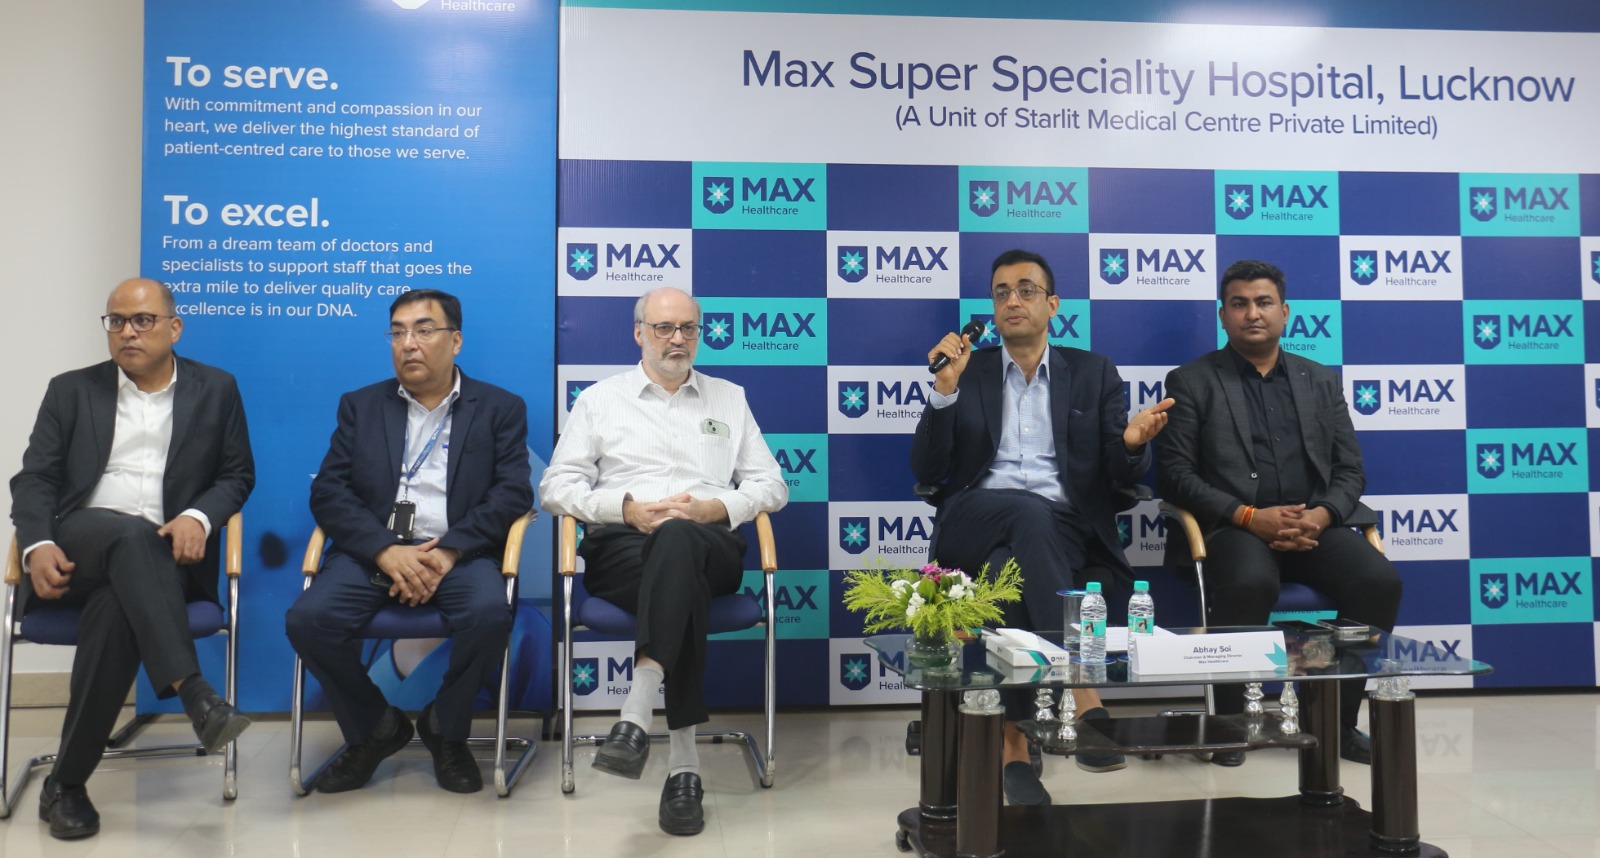 max health care in lucknow 